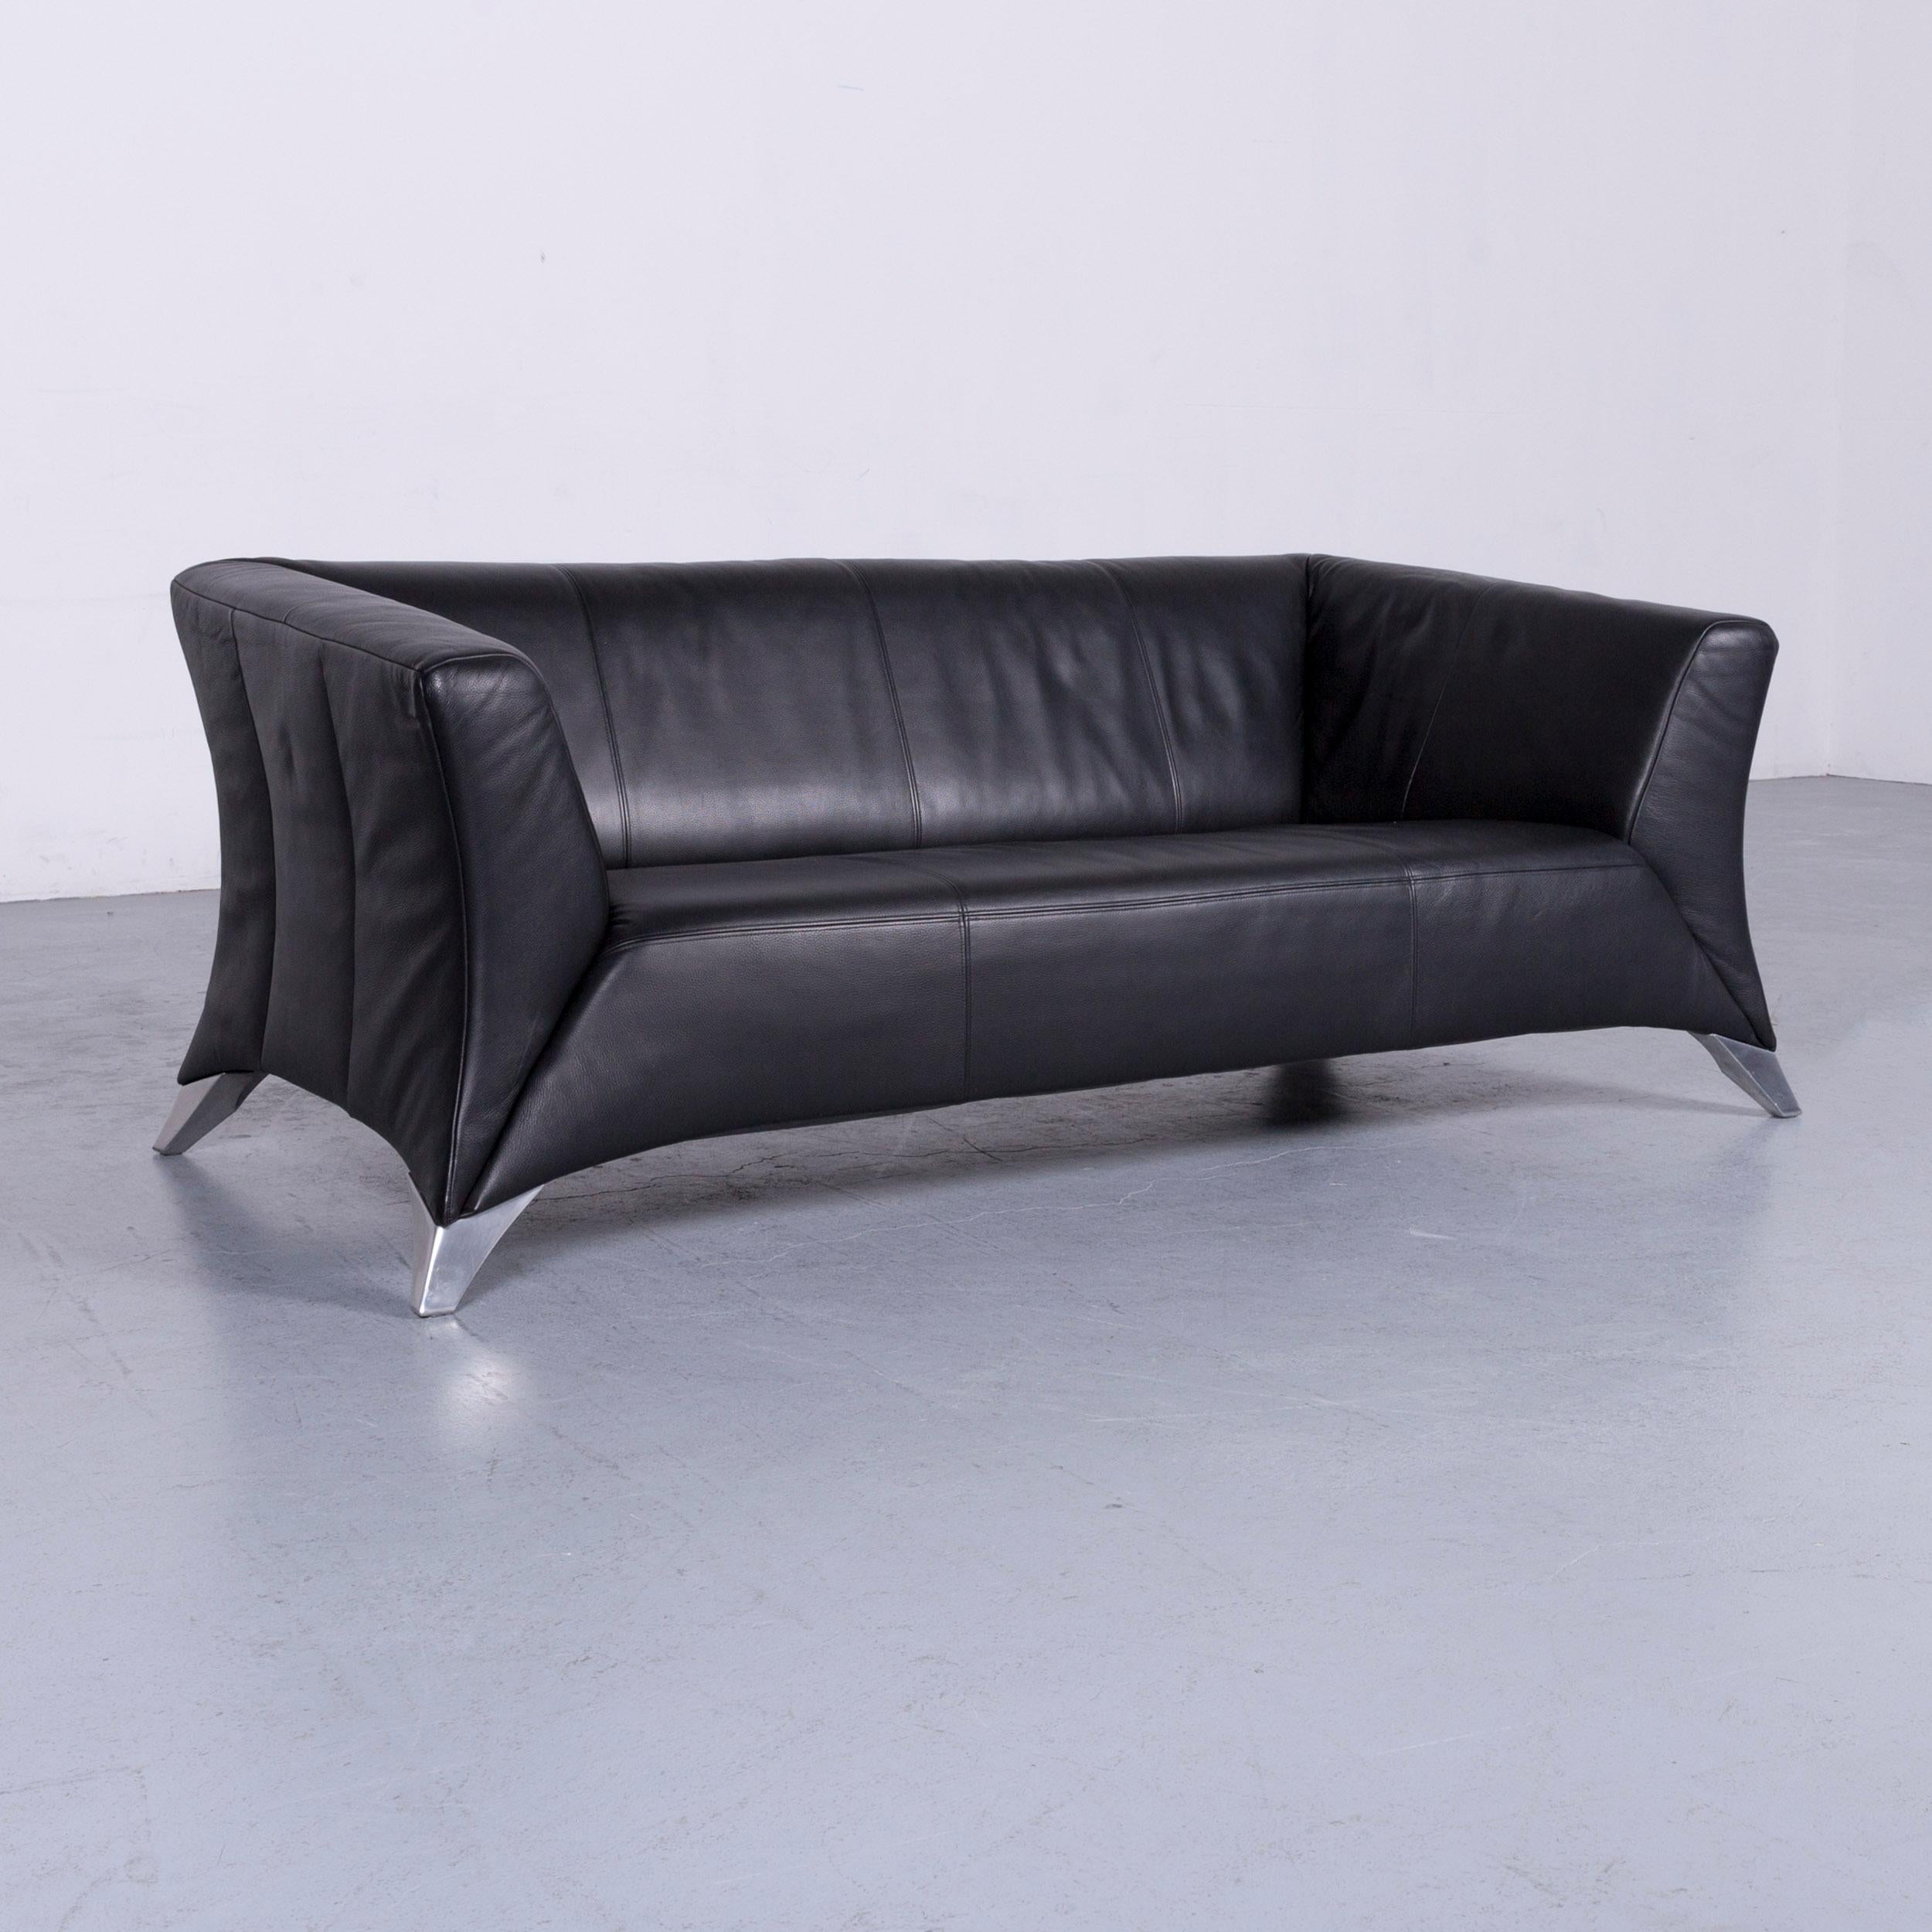 We bring to you an Rolf Benz 322 designer sofa black two-seat leather modern couch.